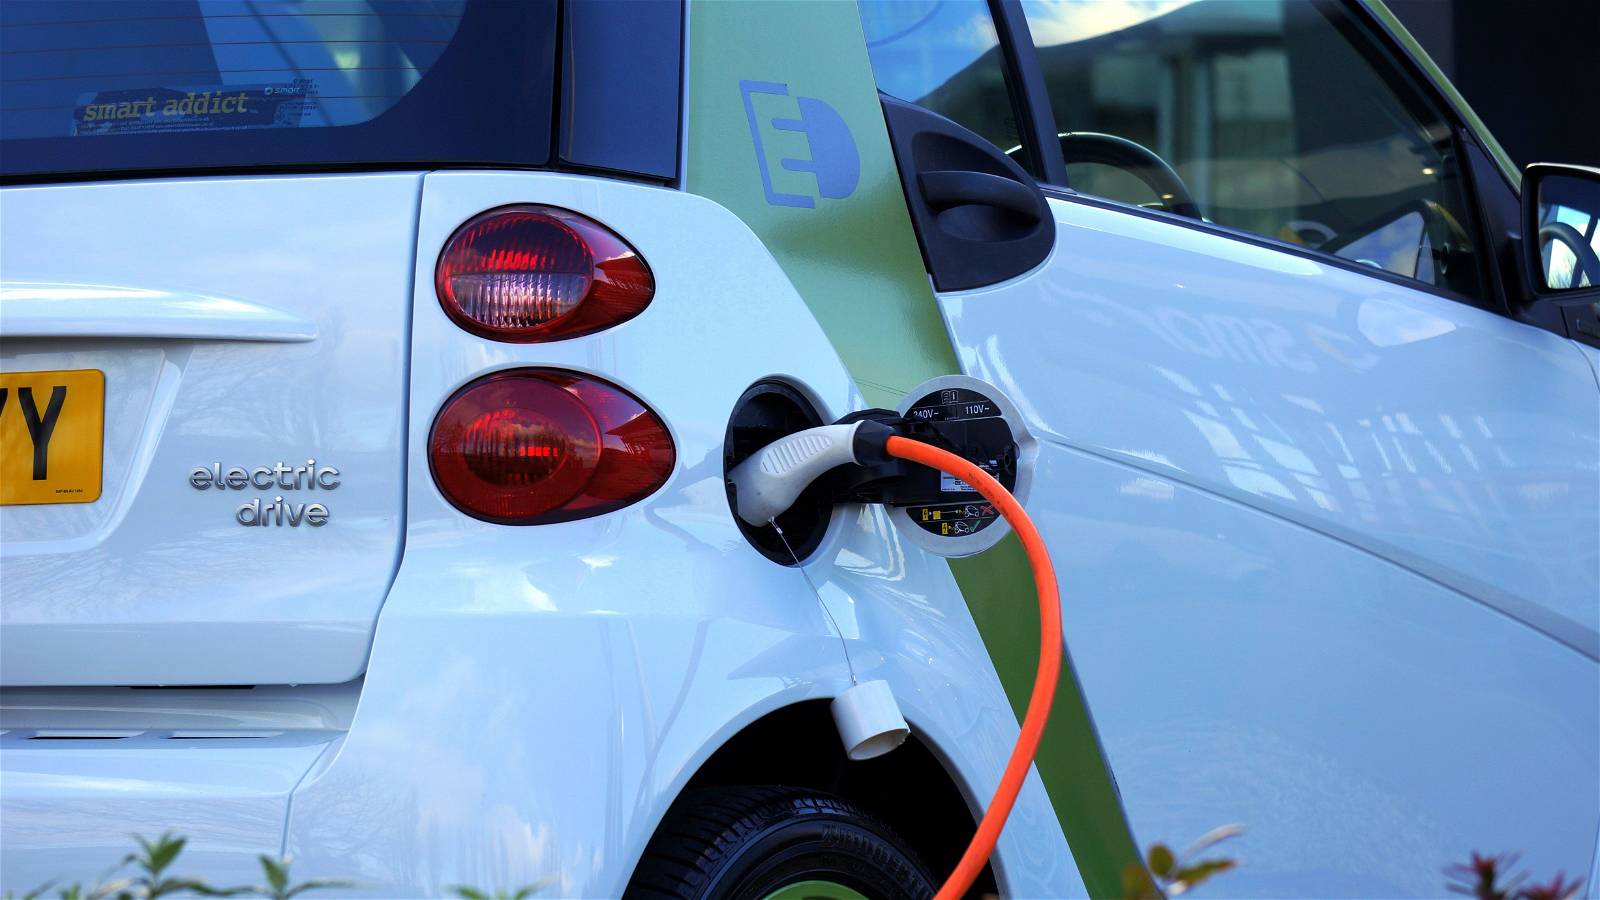 How will consumer perceptions of electric vehicles influence purchase intentions?